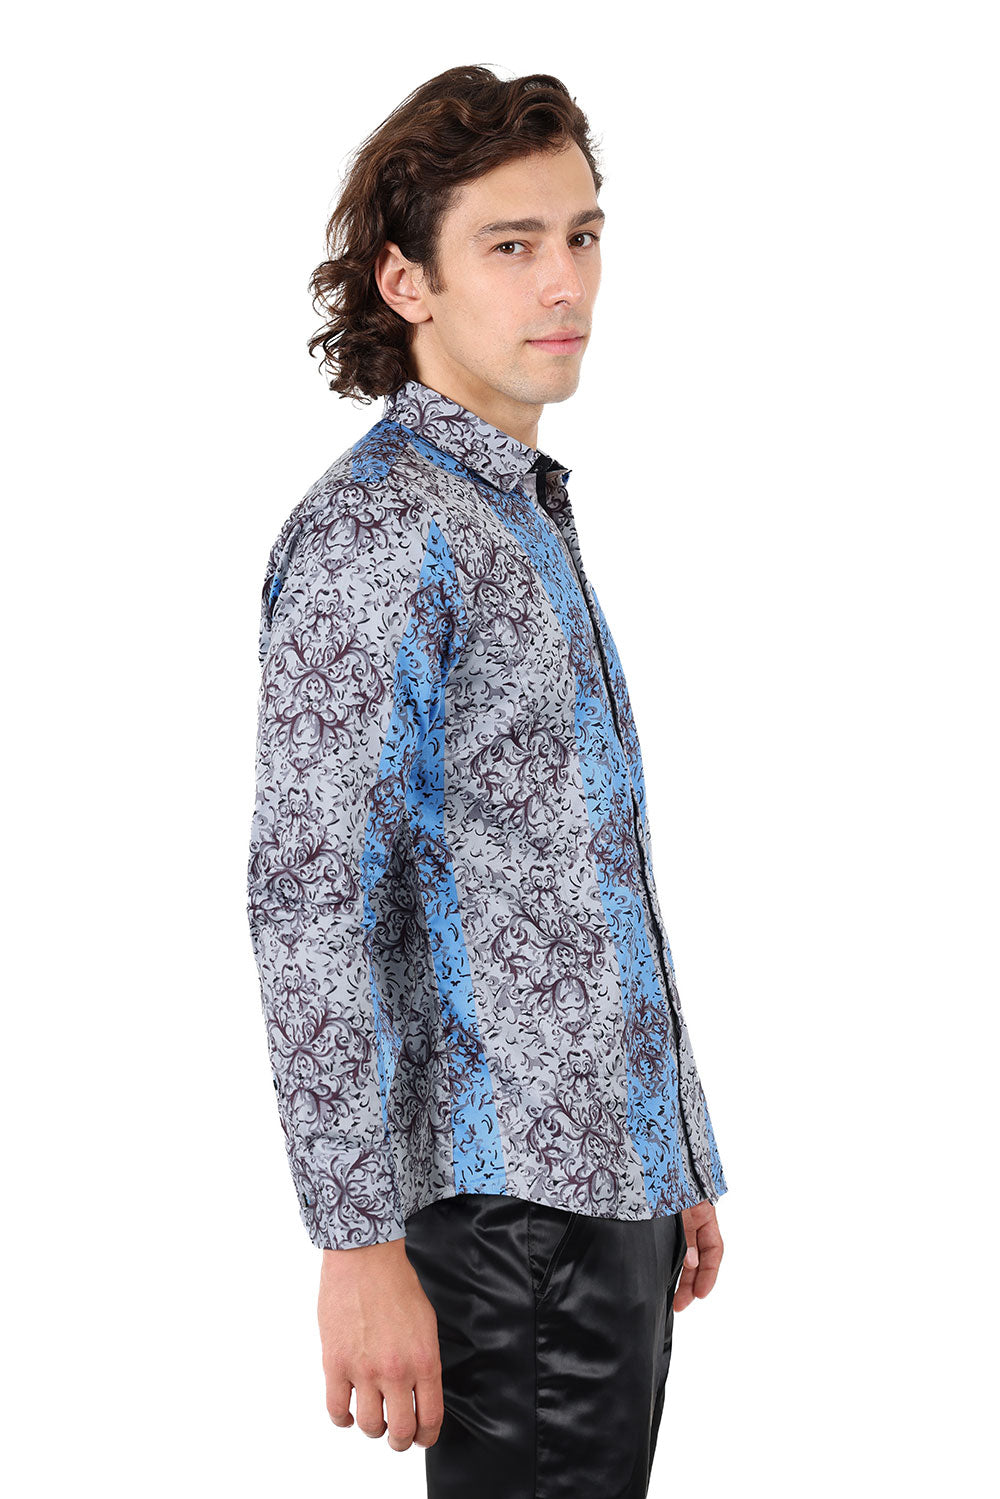 Imperial Shop Online Mandarin-collar shirt with multi-coloured buttons  Official website